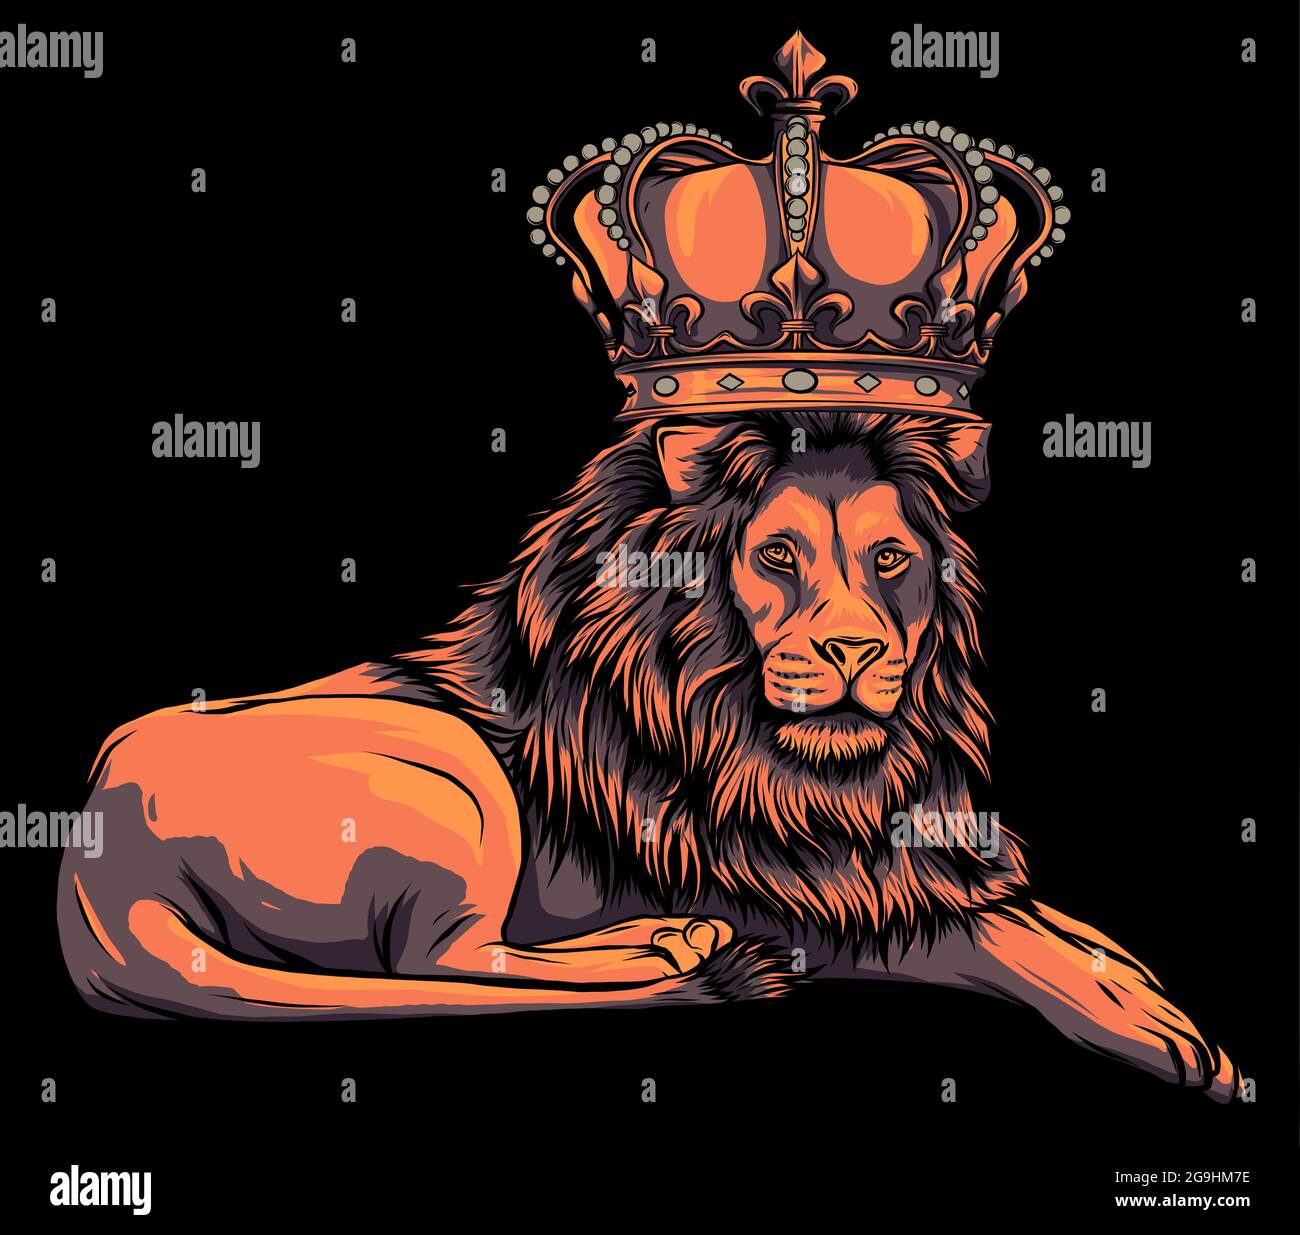 Royal lion with crown - animal king head with long mane vector Stock Vector